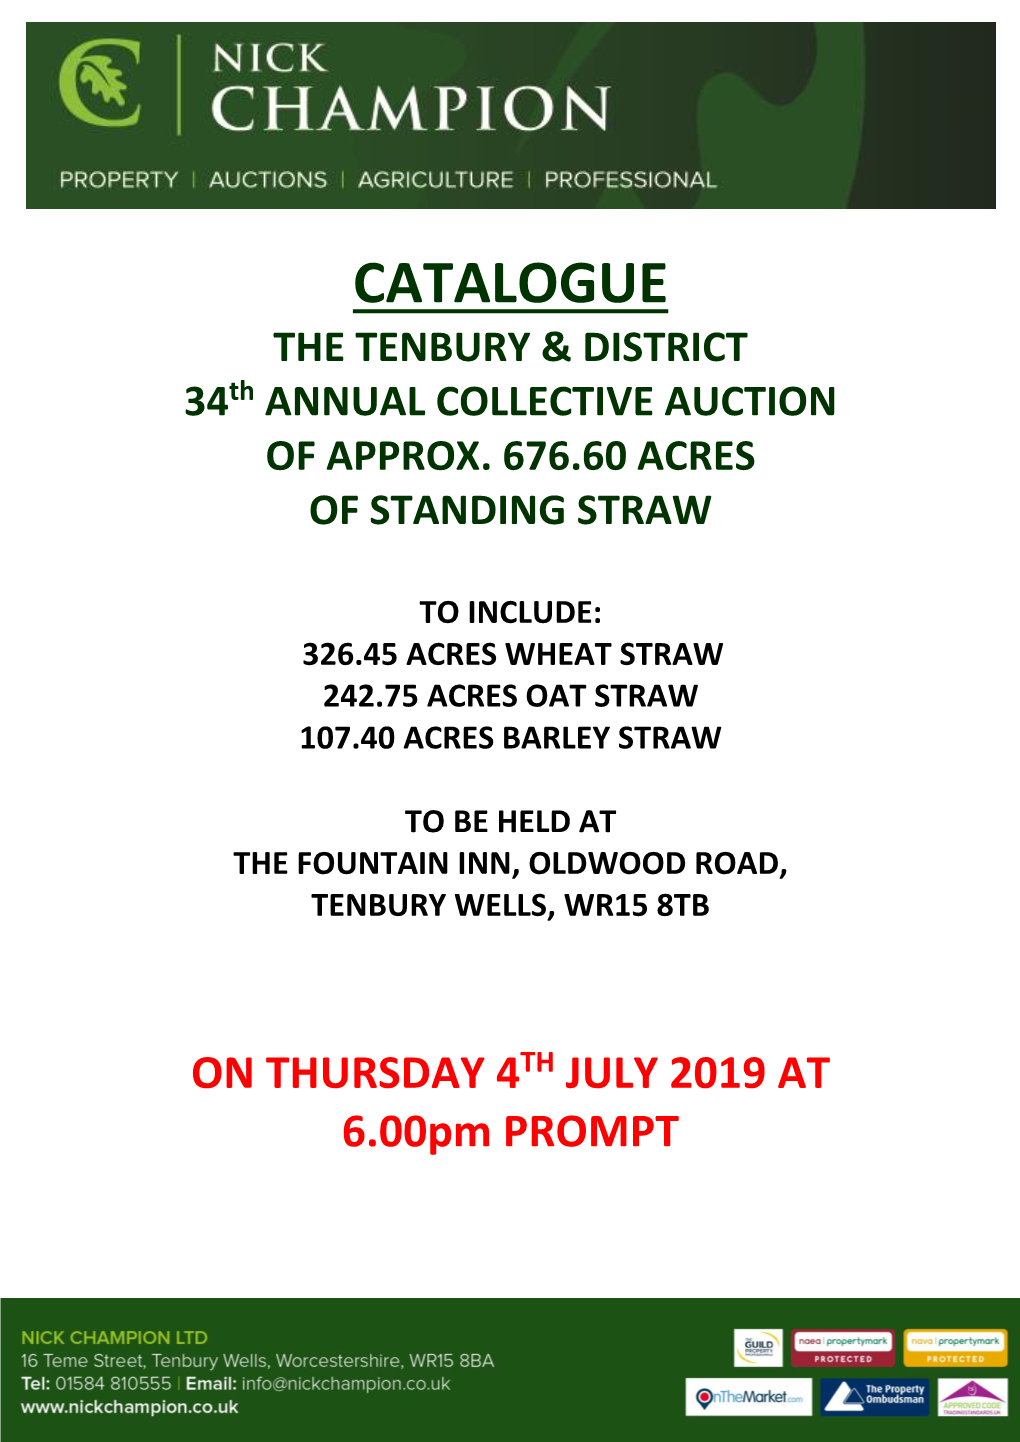 CATALOGUE the TENBURY & DISTRICT 34Th ANNUAL COLLECTIVE AUCTION of APPROX